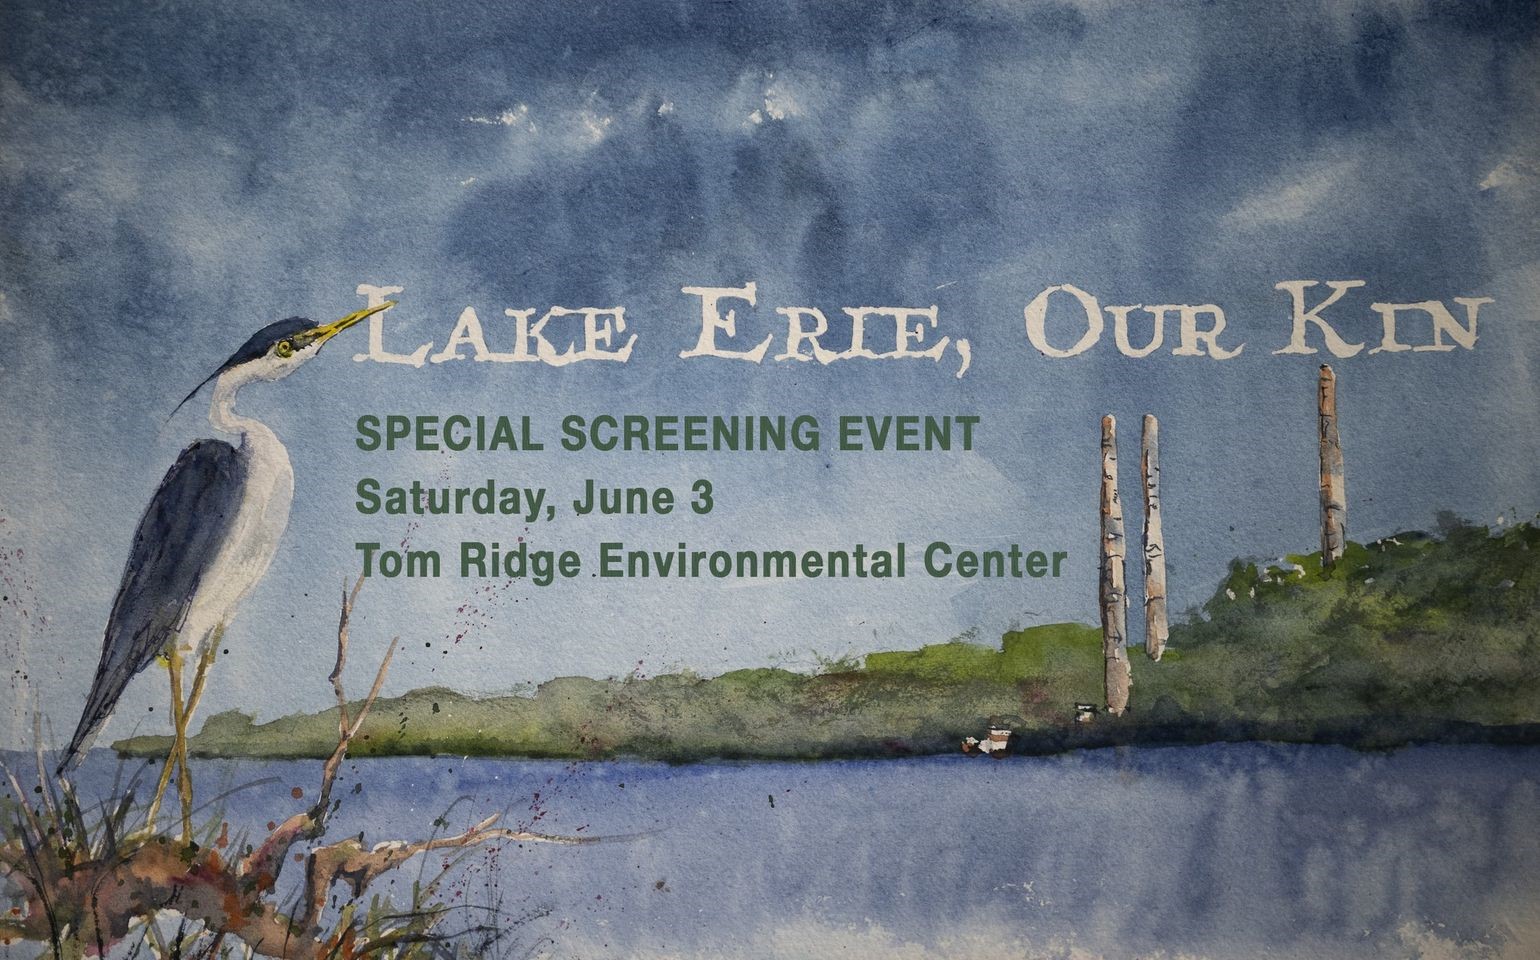 Lake Erie, Our Kin Special Screening Event